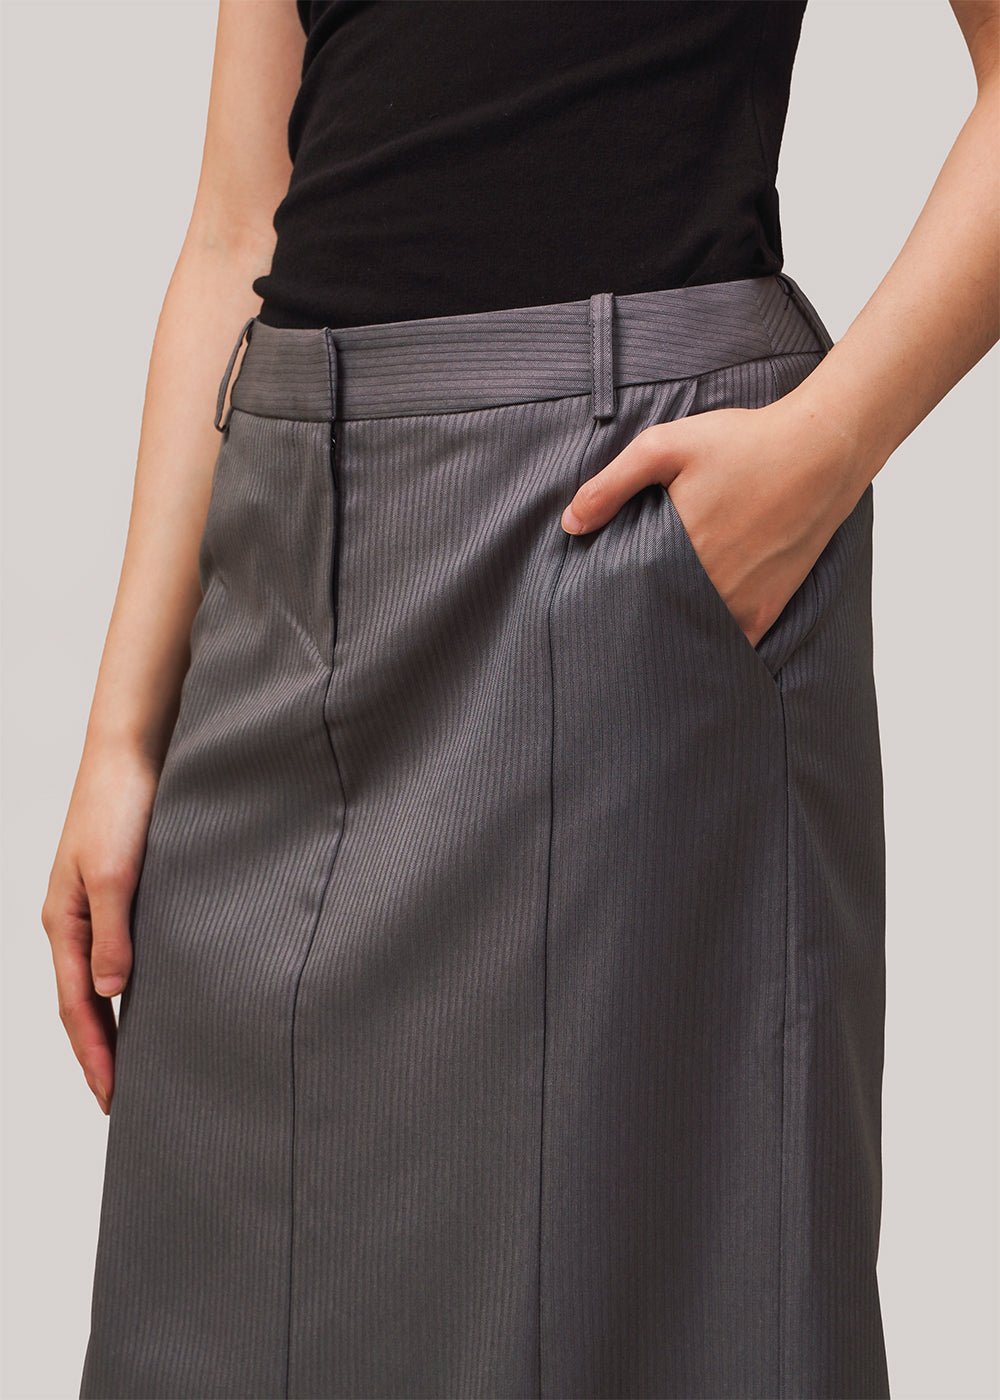 Permanent Vacation Grey Pinstripe All-Day Maxi Skirt - New Classics Studios Sustainable Ethical Fashion Canada